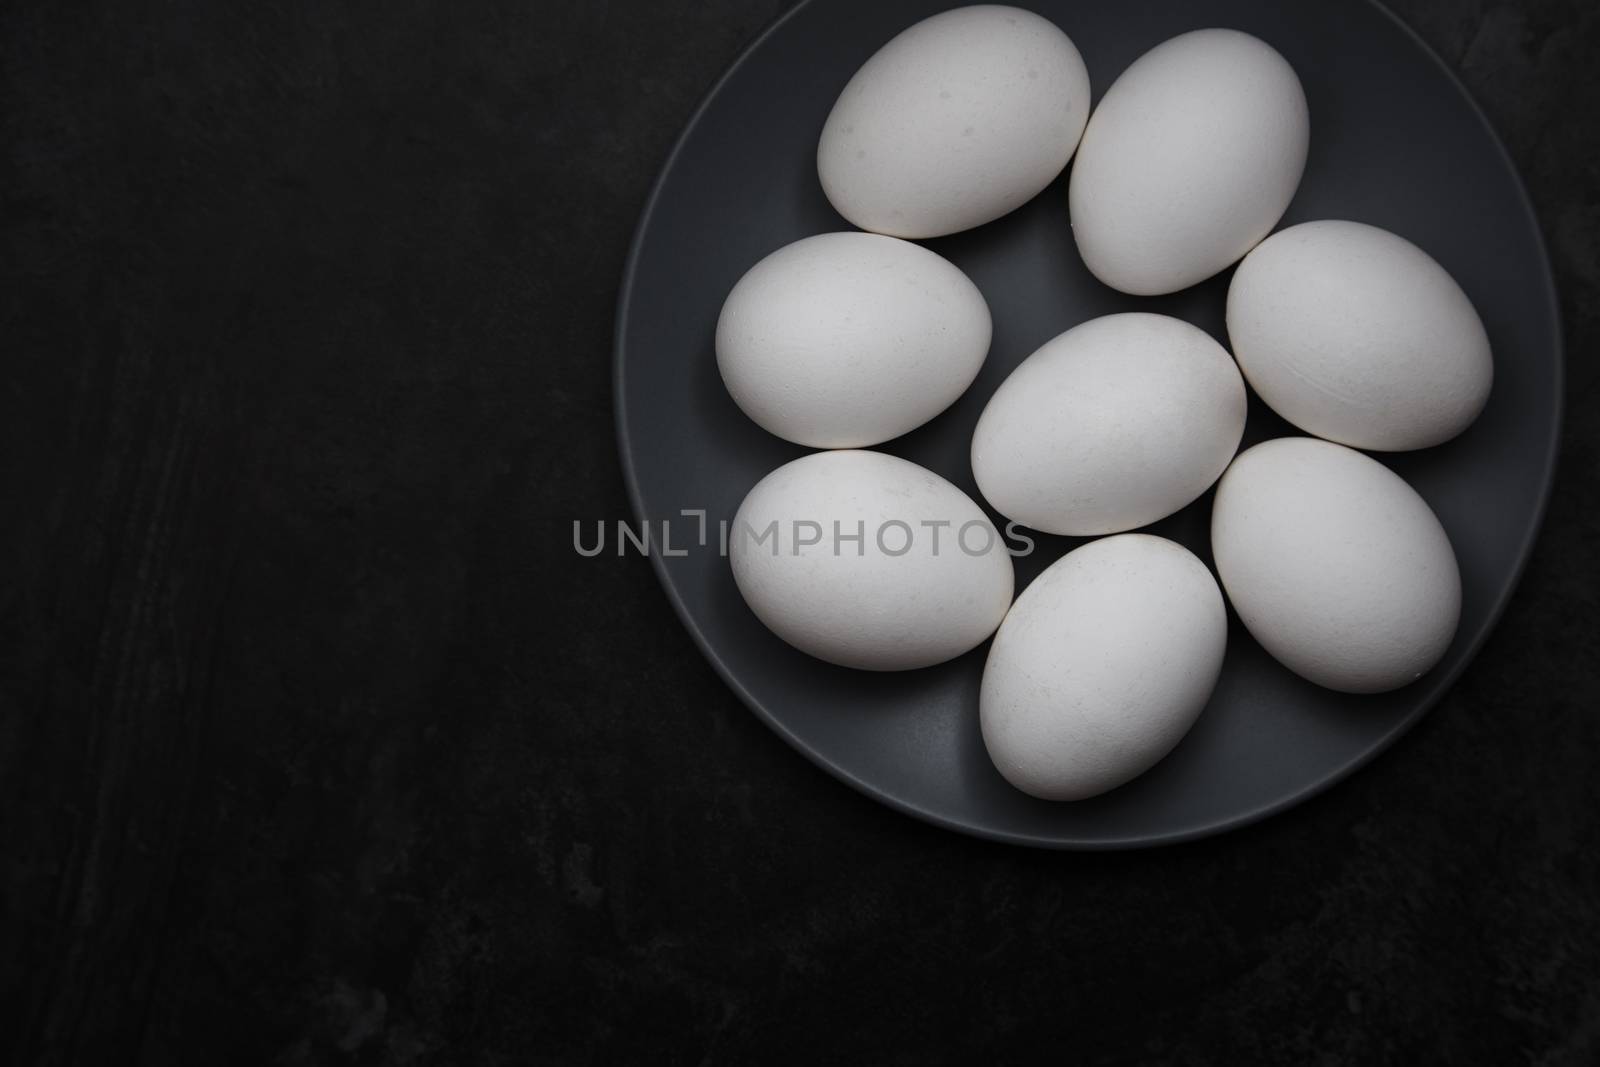 Chicken eggs on a plate by Novic